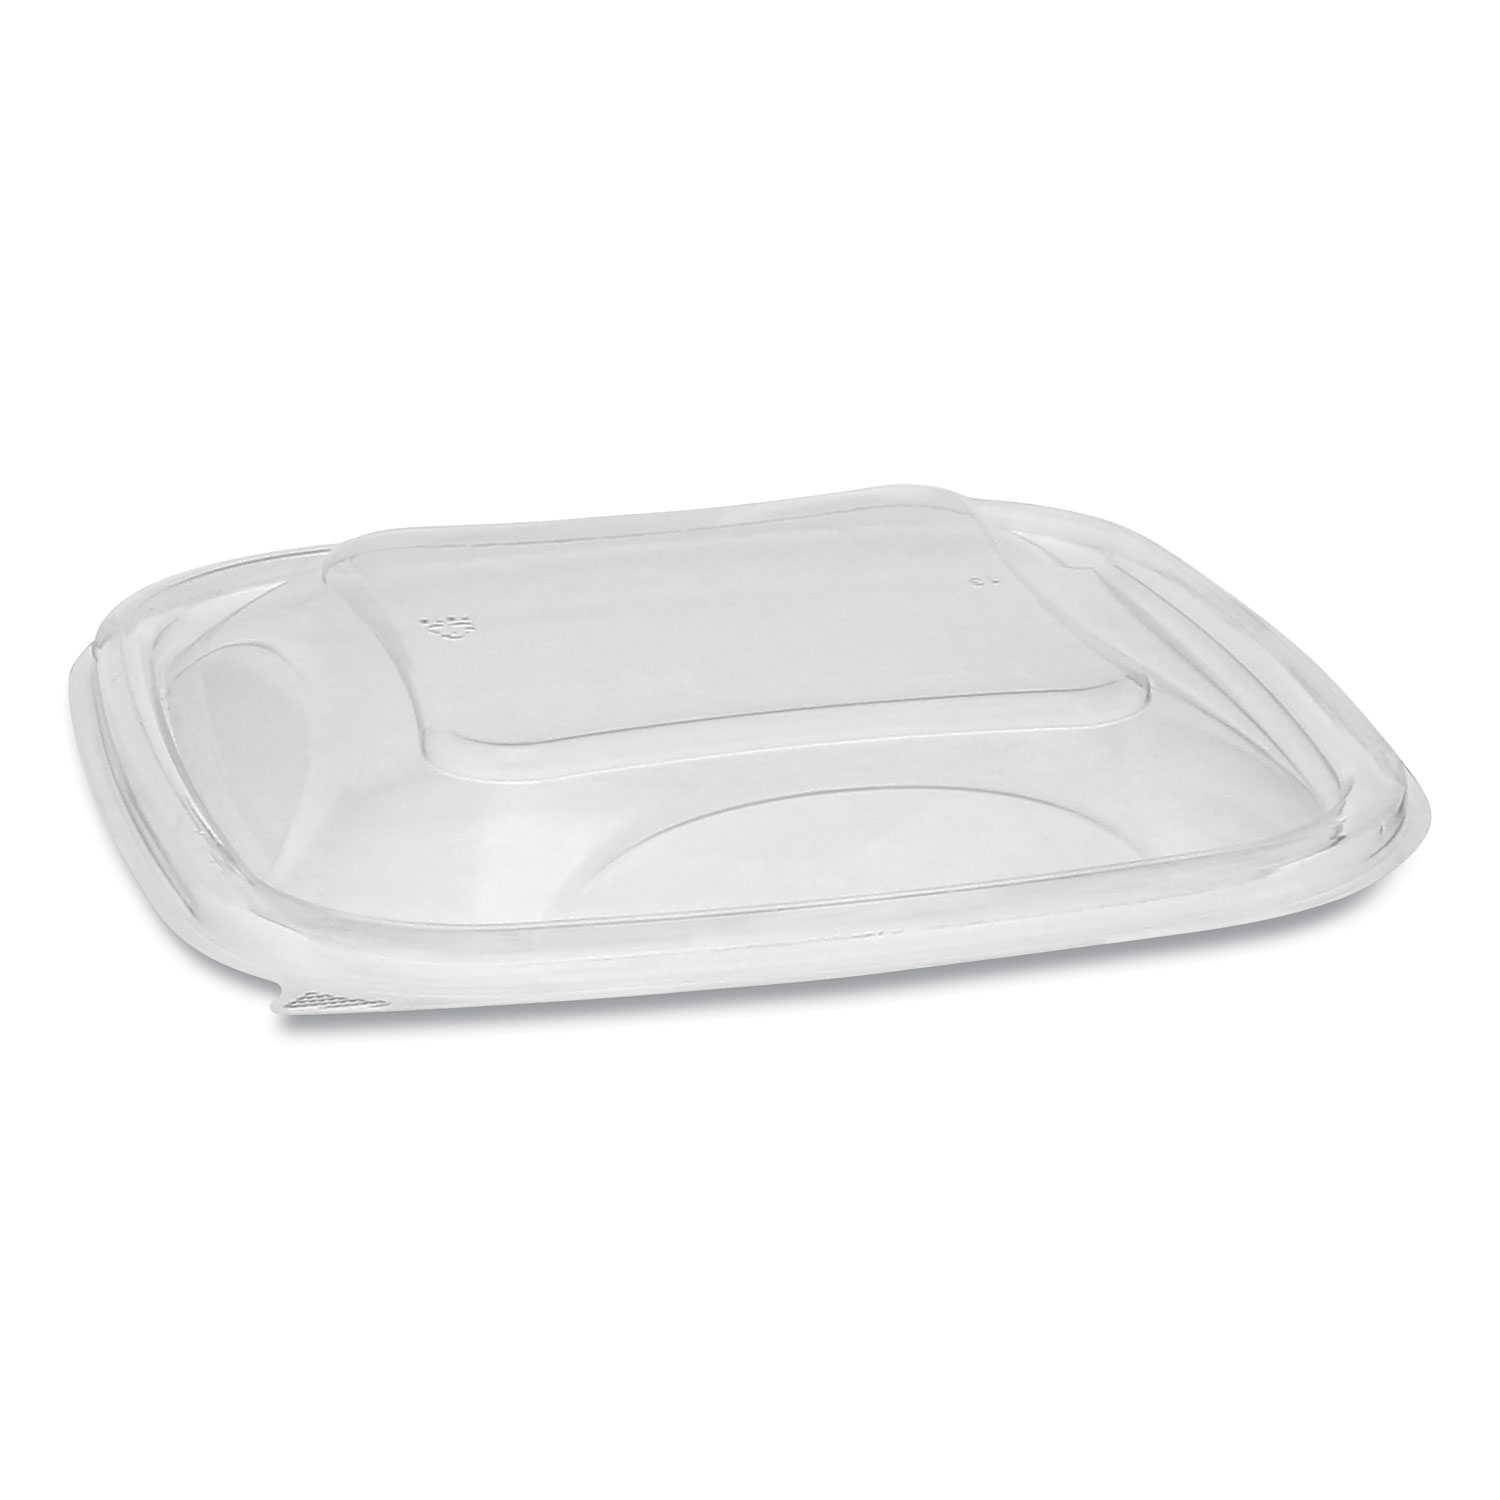  Pactiv SACLD07 EarthChoice PET Container Lids, For 24-32 oz Container Bases, 7.38 x 7.38 x 0.82, Clear, 300/Carton (PCTSACLD07) 